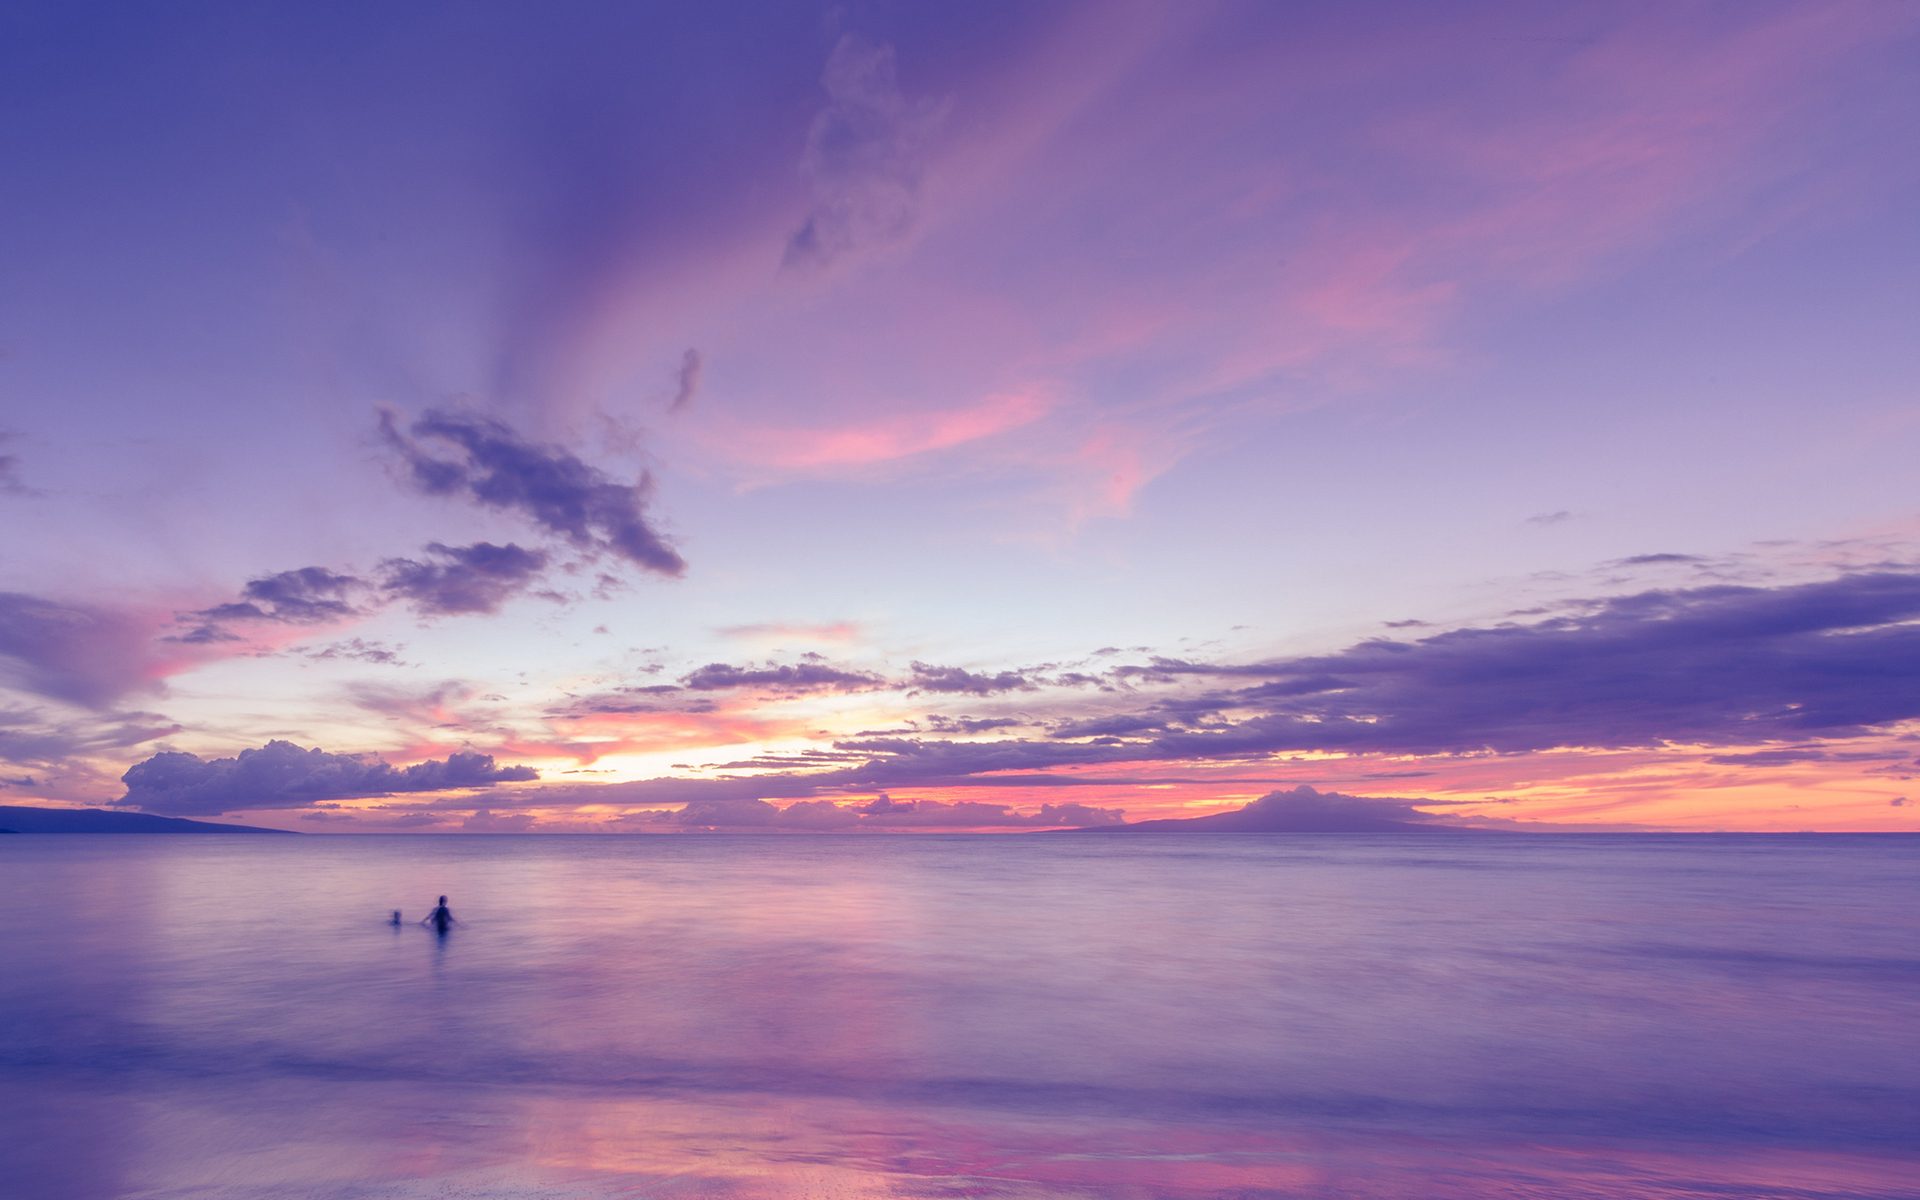 Free Download Free Download Ocean Clouds Sunset Purple Beach Wallpaper 1920x1200 1920x1200 For